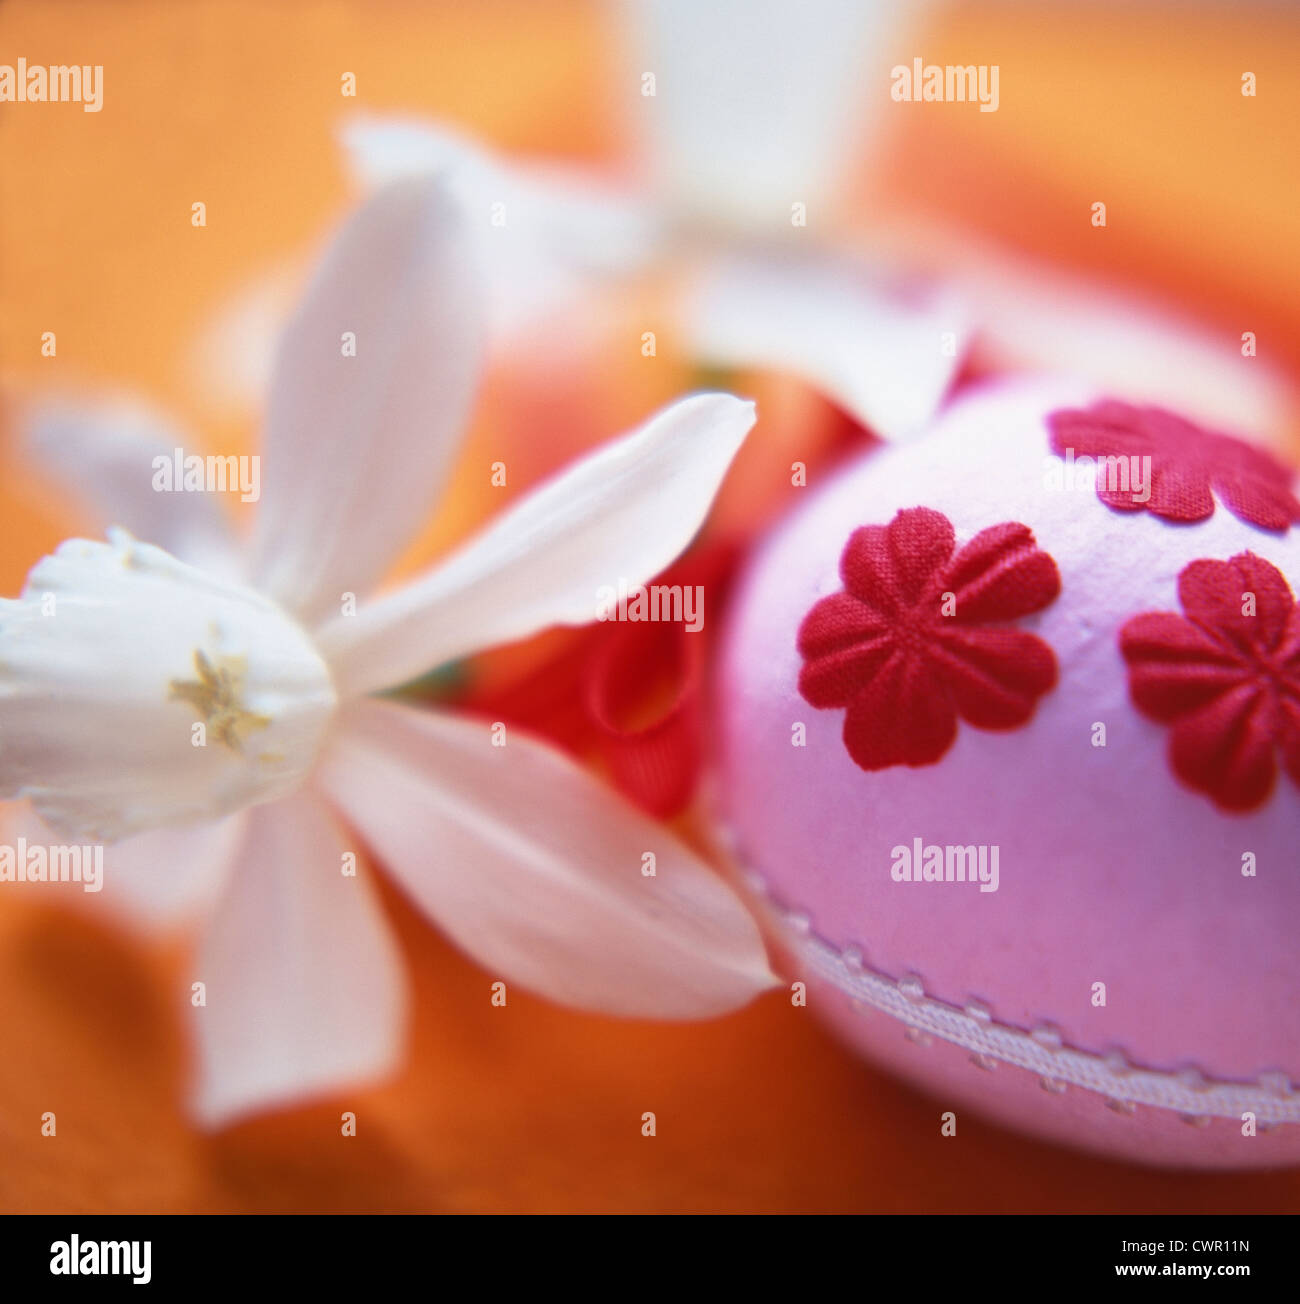 Narcissus, cut white flower beside a red and white fabric decoration. Stock Photo